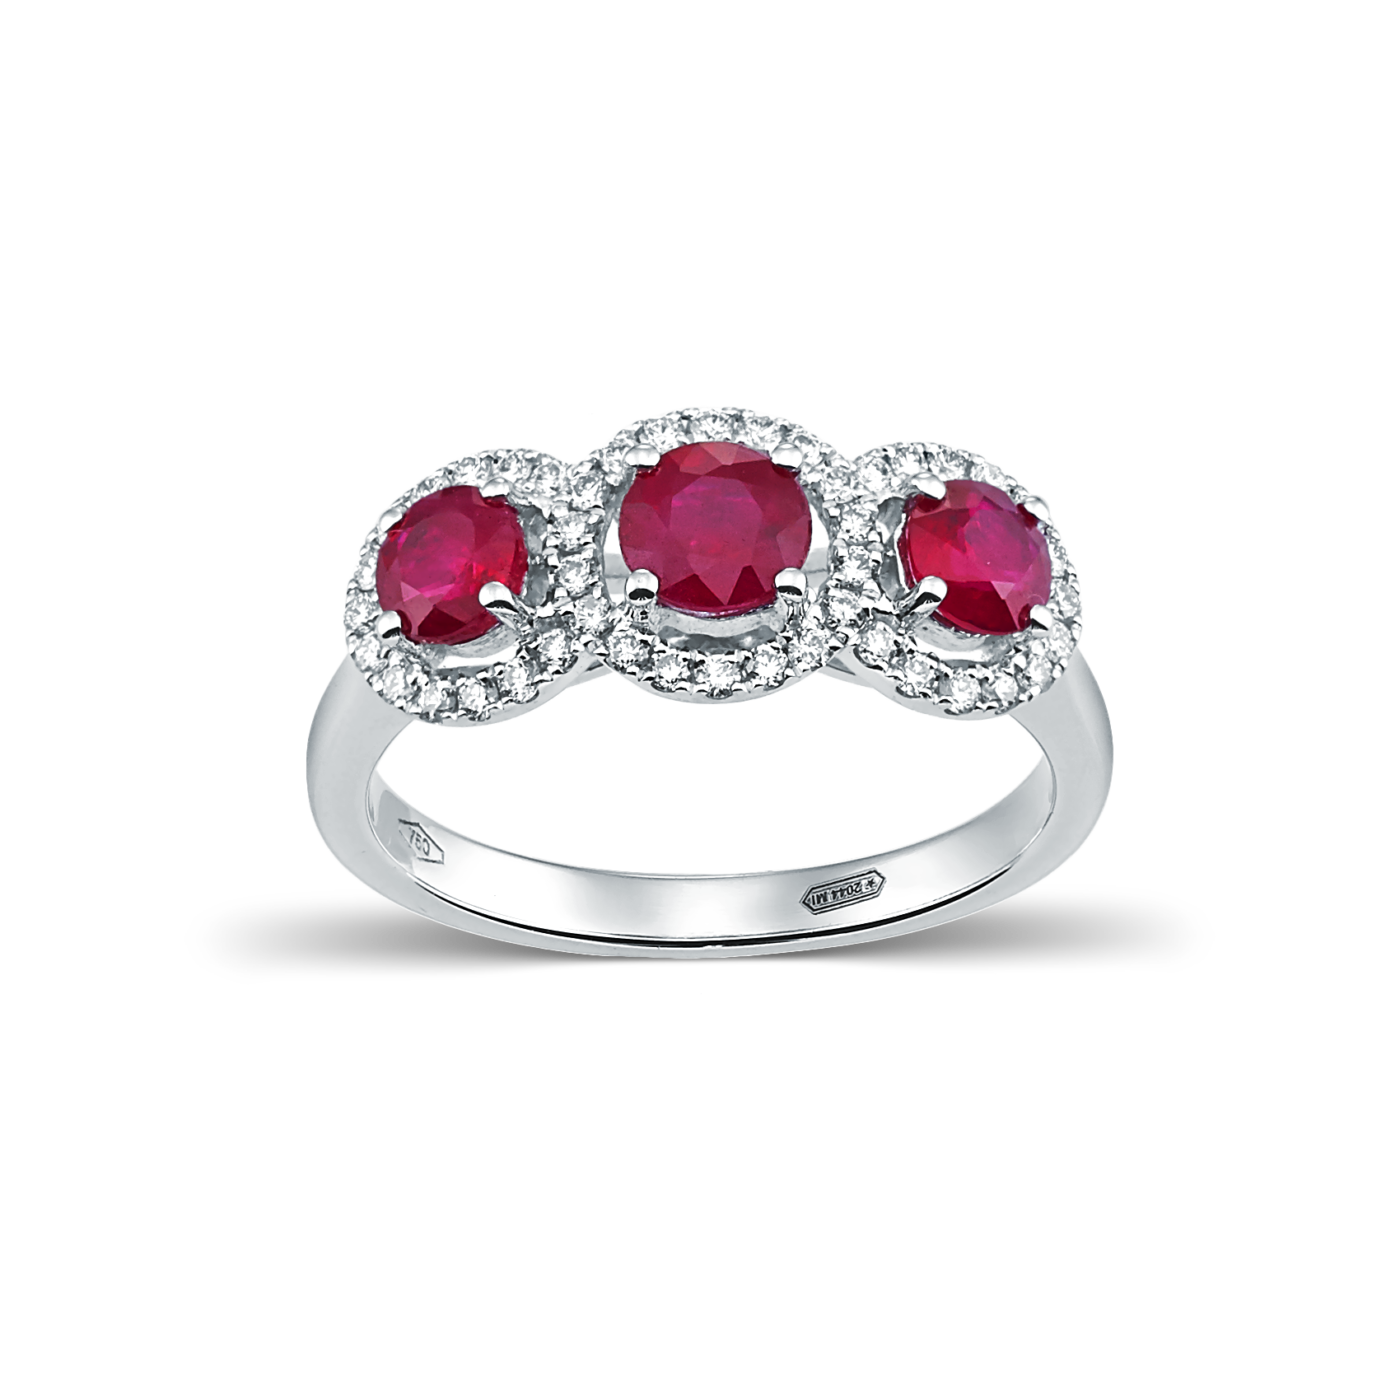 Devous Rubies and Diamonds Ring